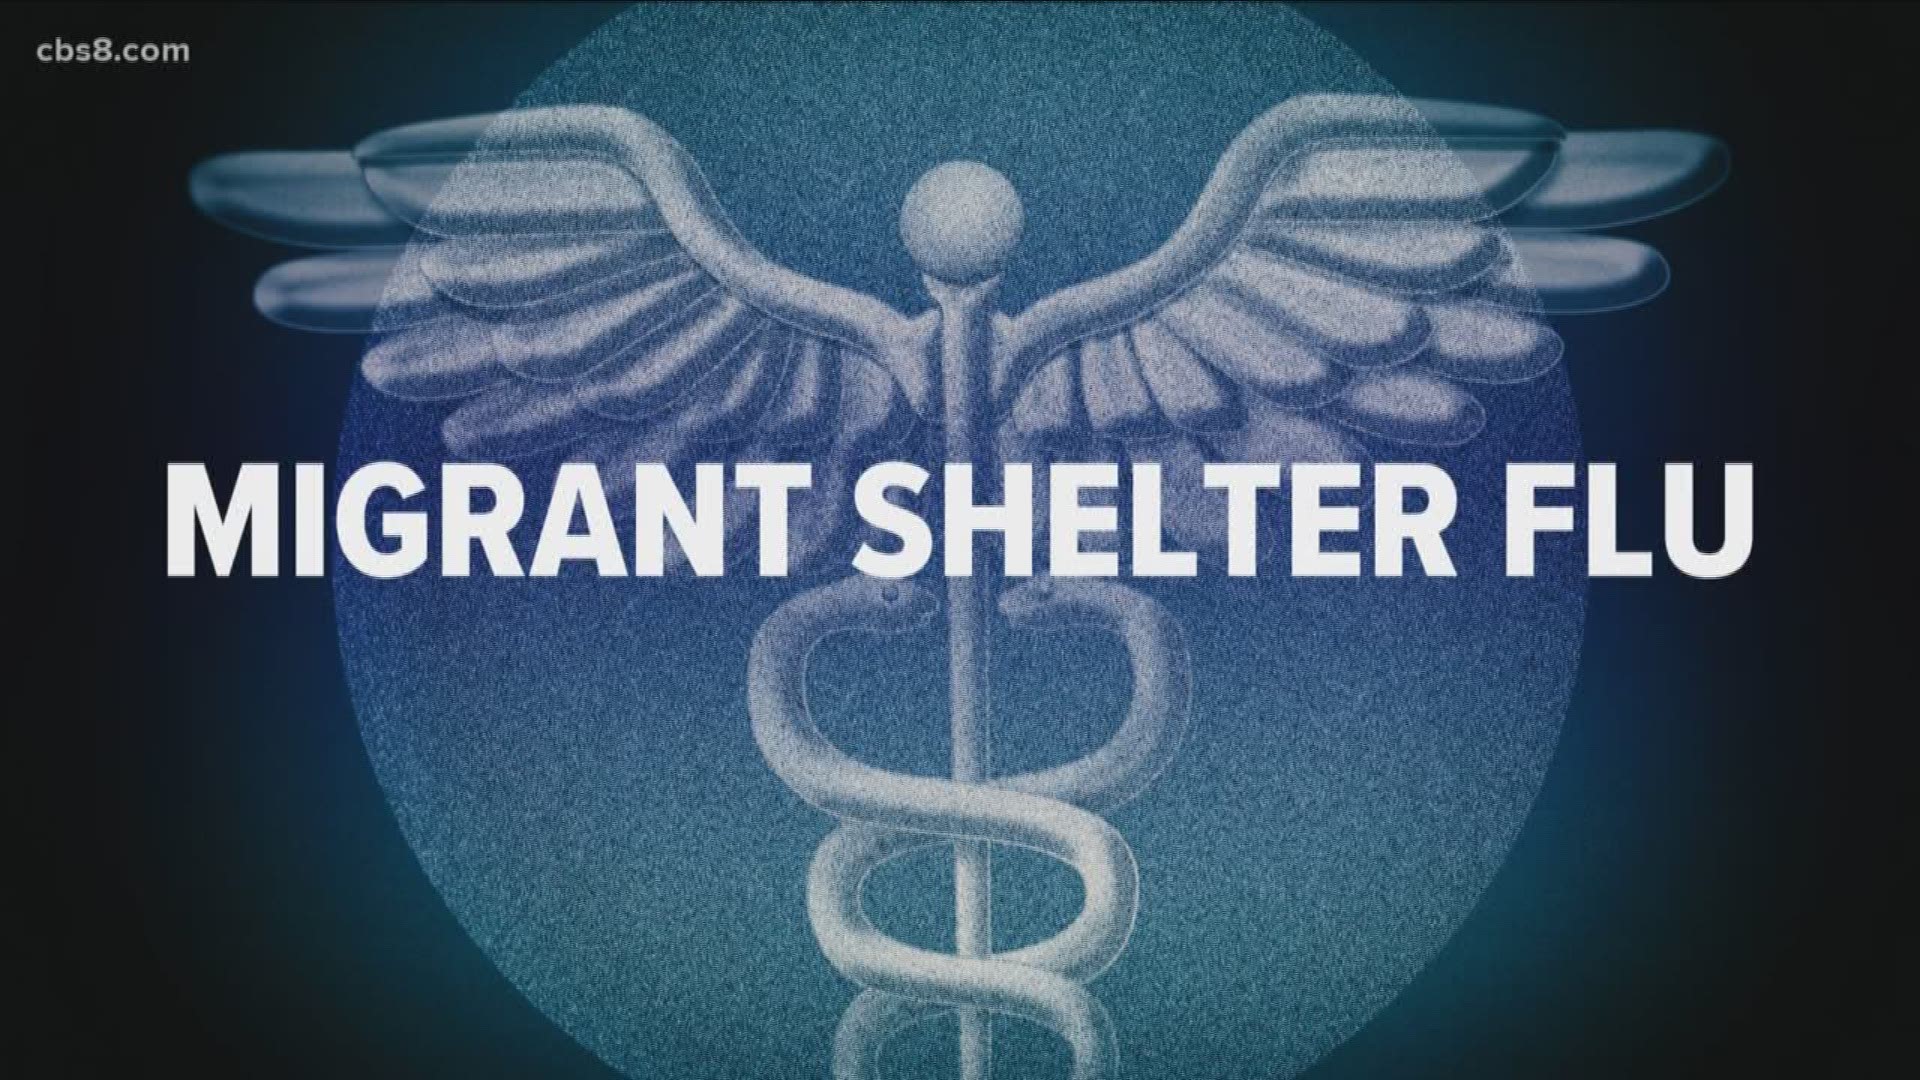 The county has identified 16 people at the shelter who have an "influenza-like illness."